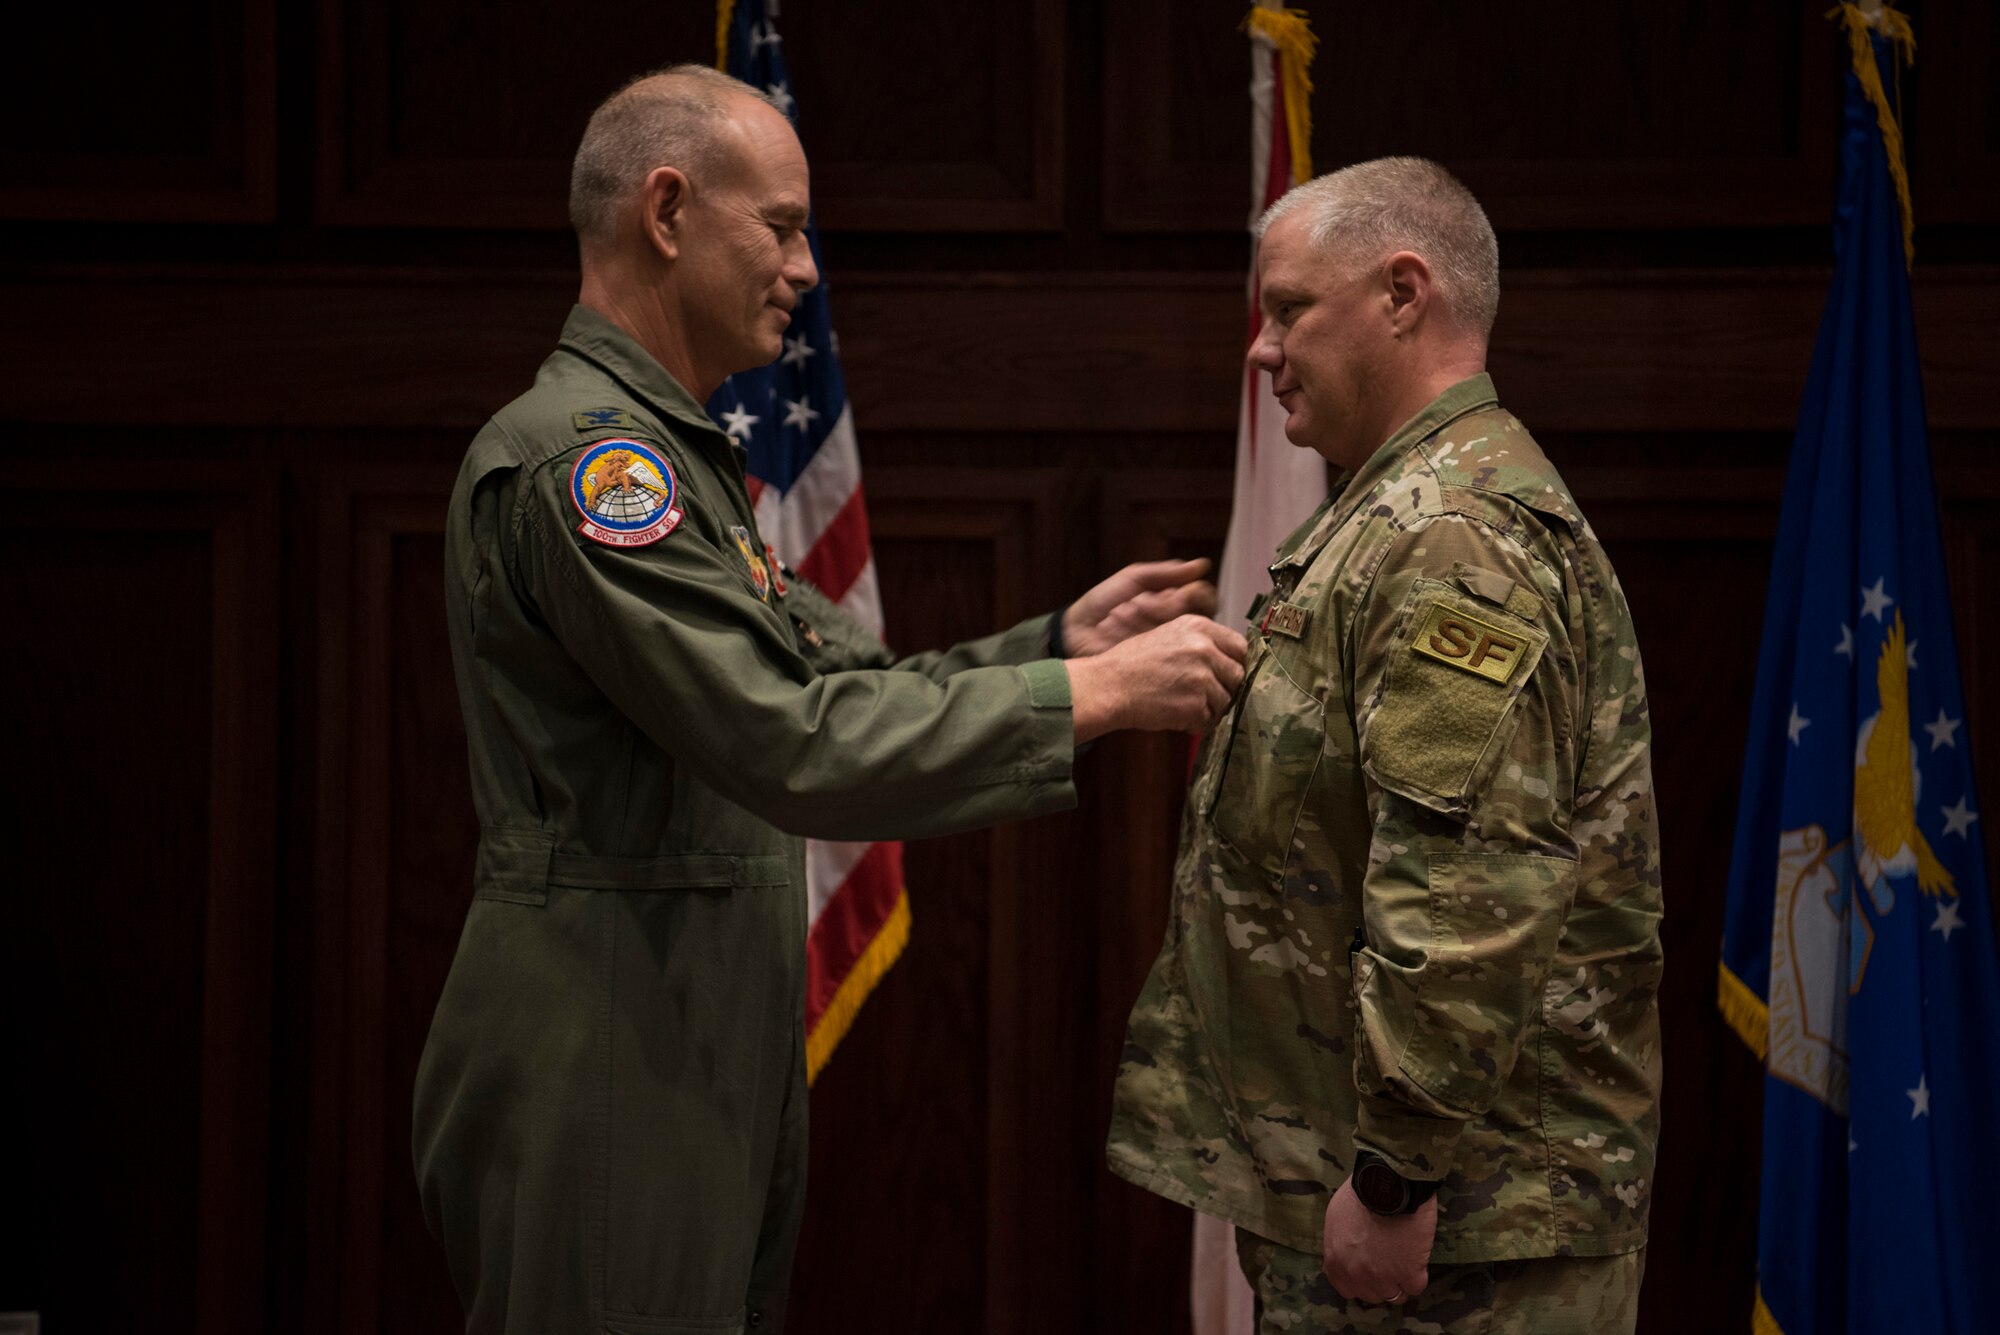 187th SFS Chief Awarded Bronze Star Medal